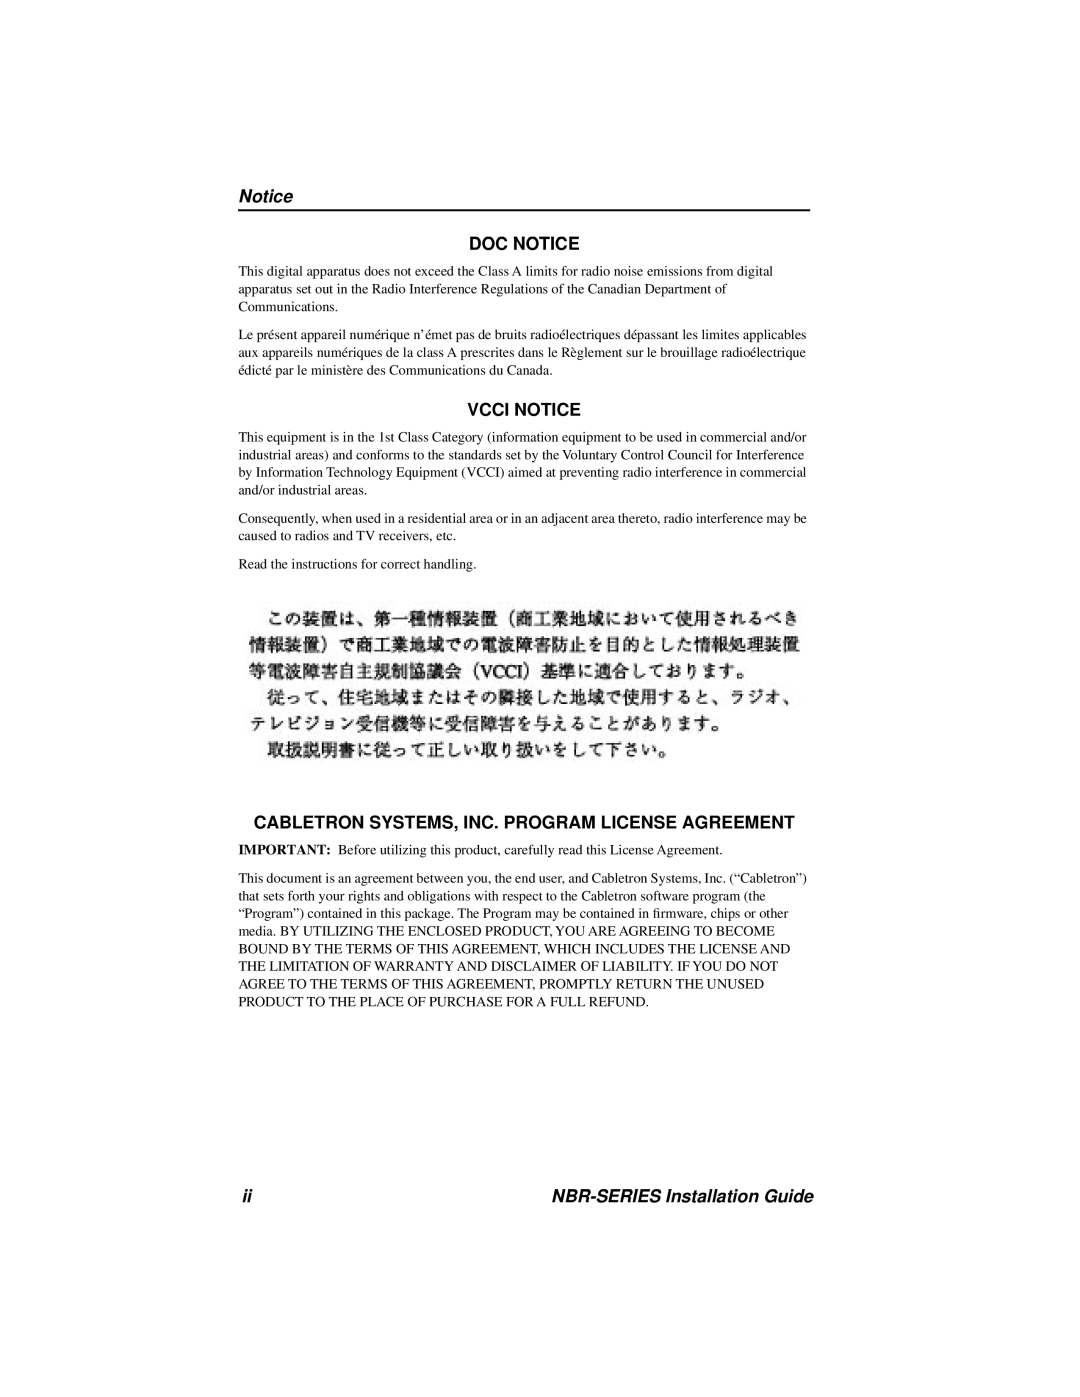 Cabletron Systems NBR-420, NBR-220, NBR-620 manual Doc Notice, Vcci Notice, Cabletron Systems, Inc. Program License Agreement 